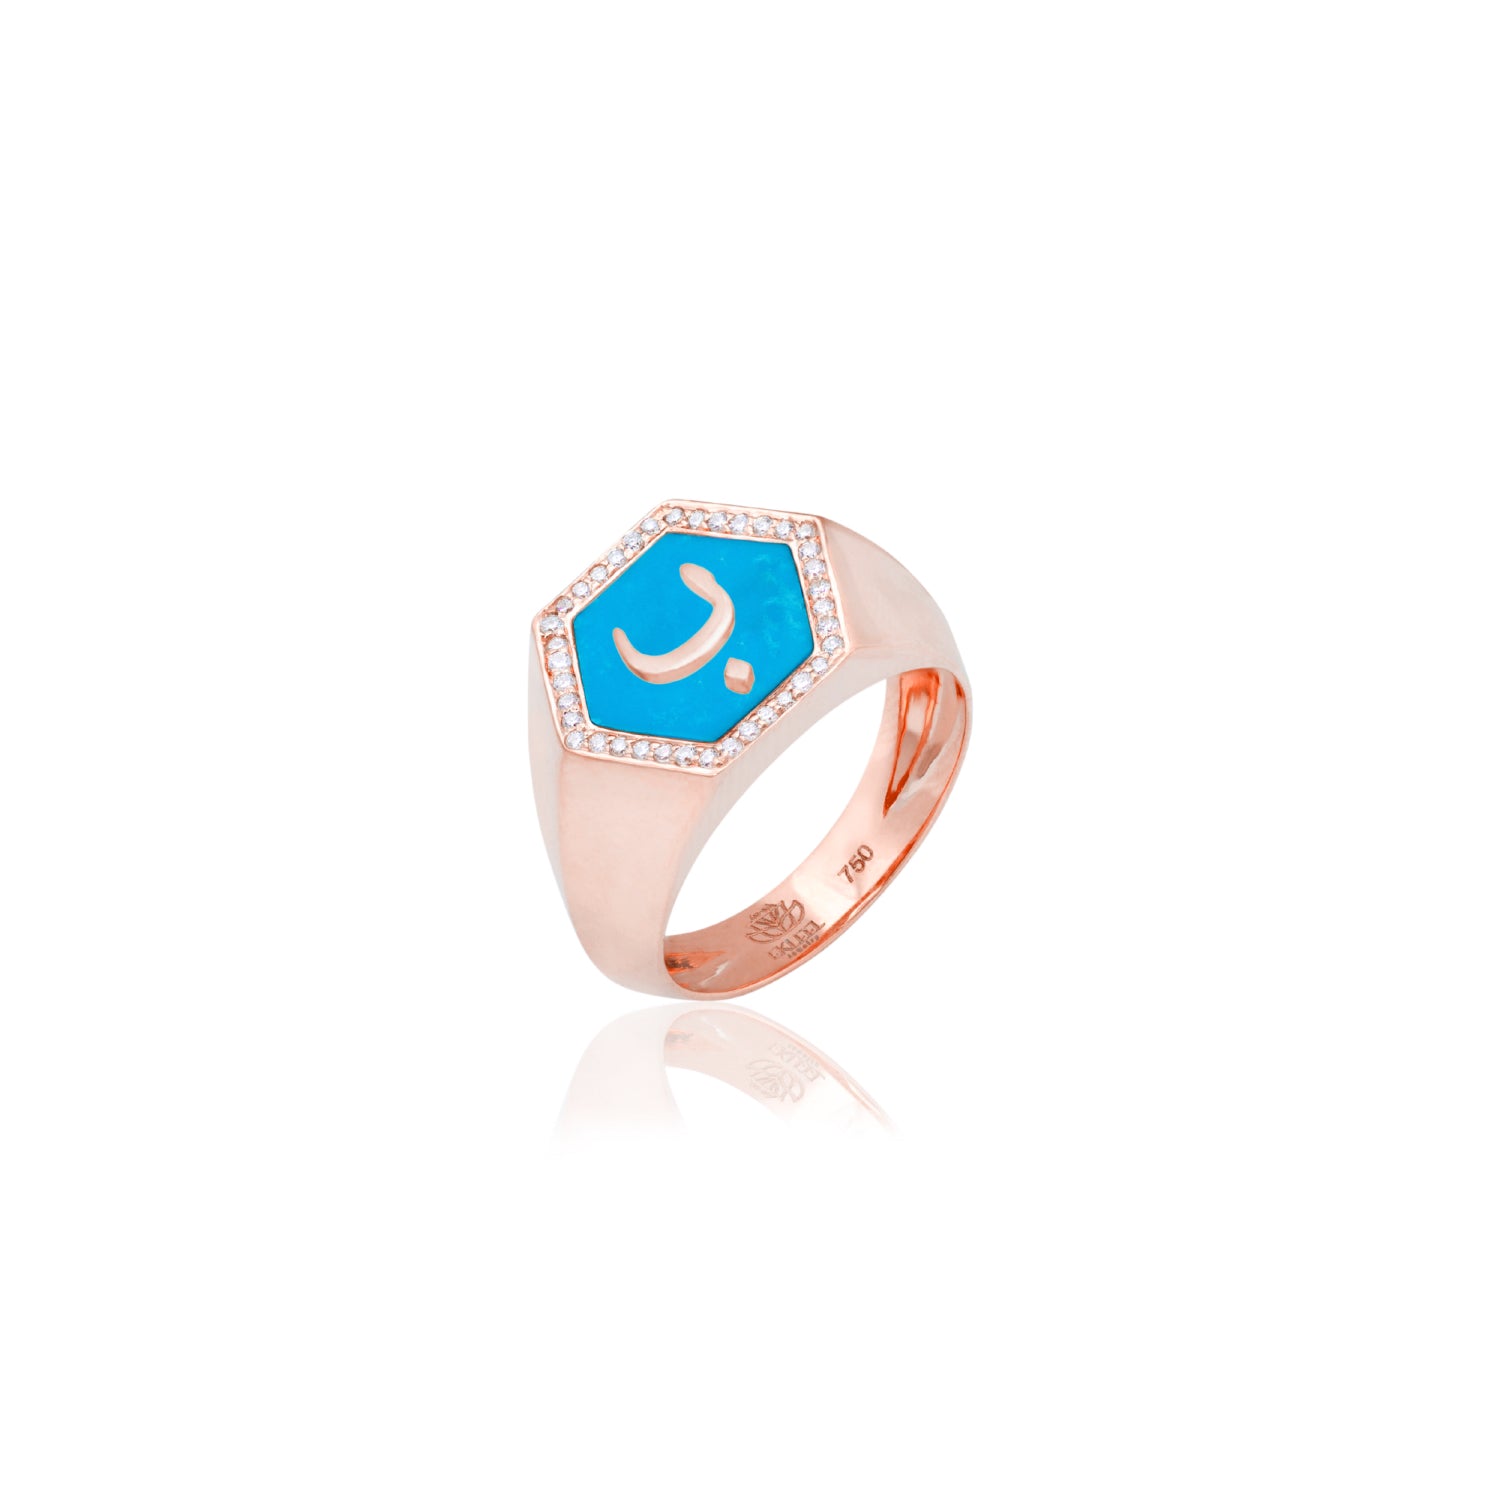 Qamoos 2.0 Letter ب Turquoise and Diamond Signet Ring in Rose Gold